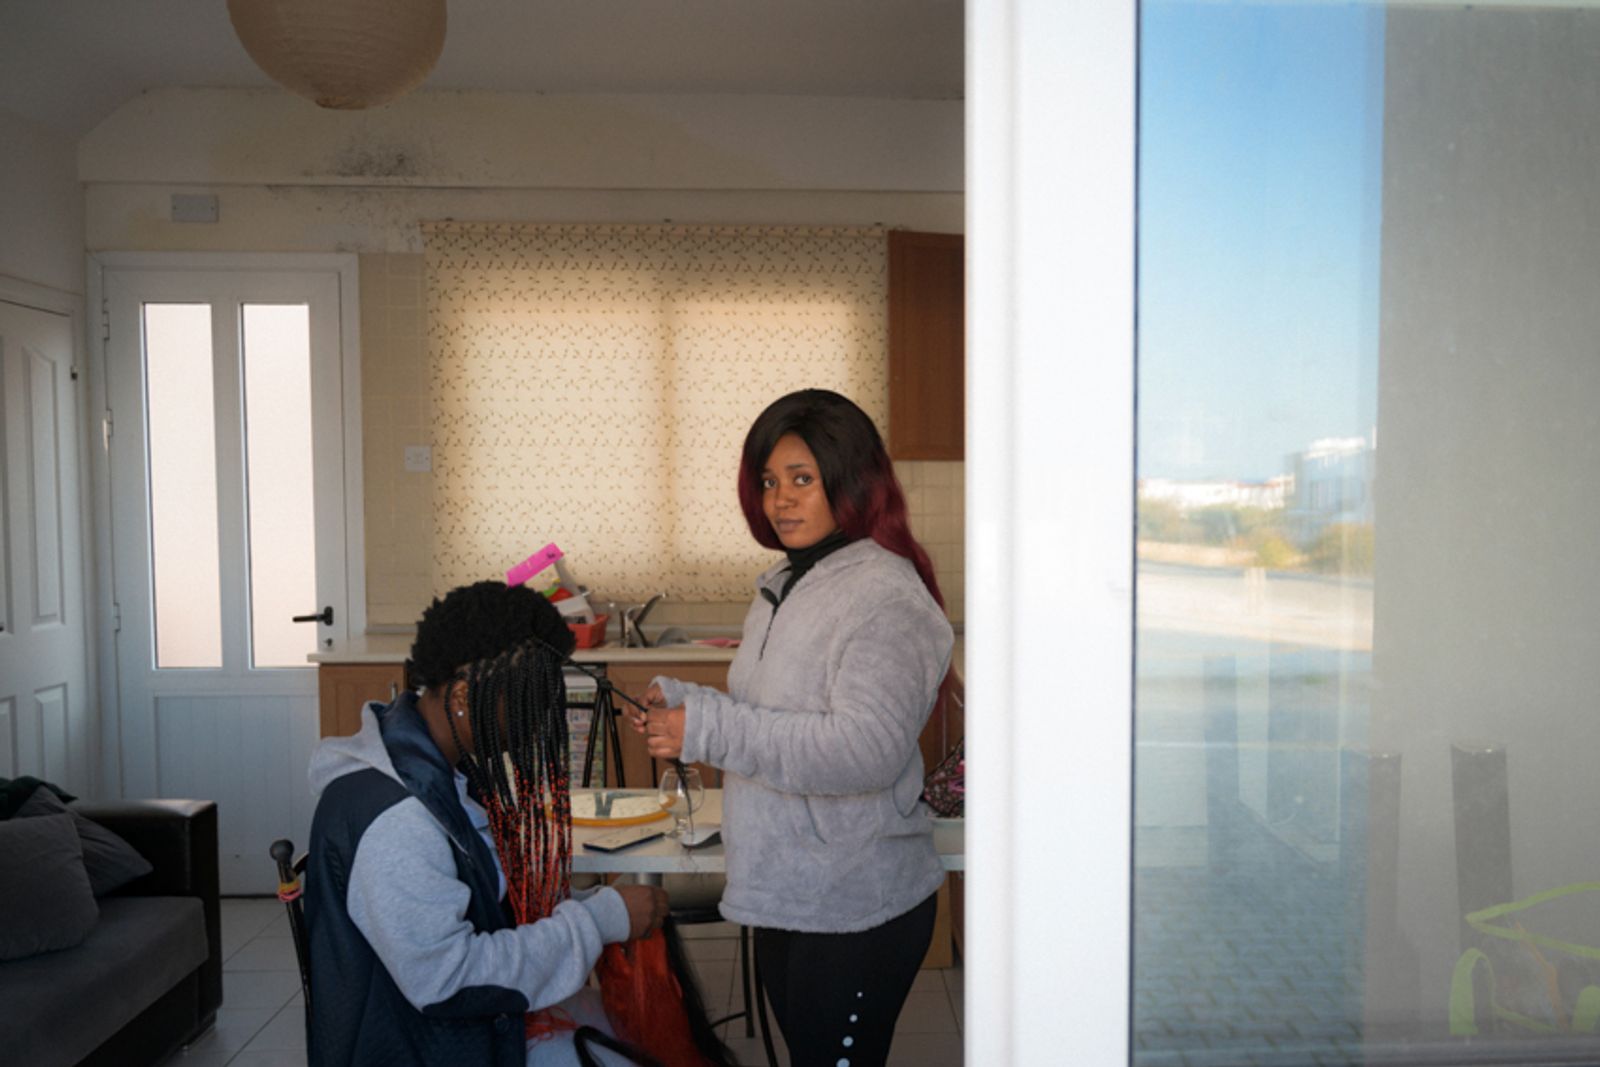 © Anne Ackermann - Image from the Education Island photography project